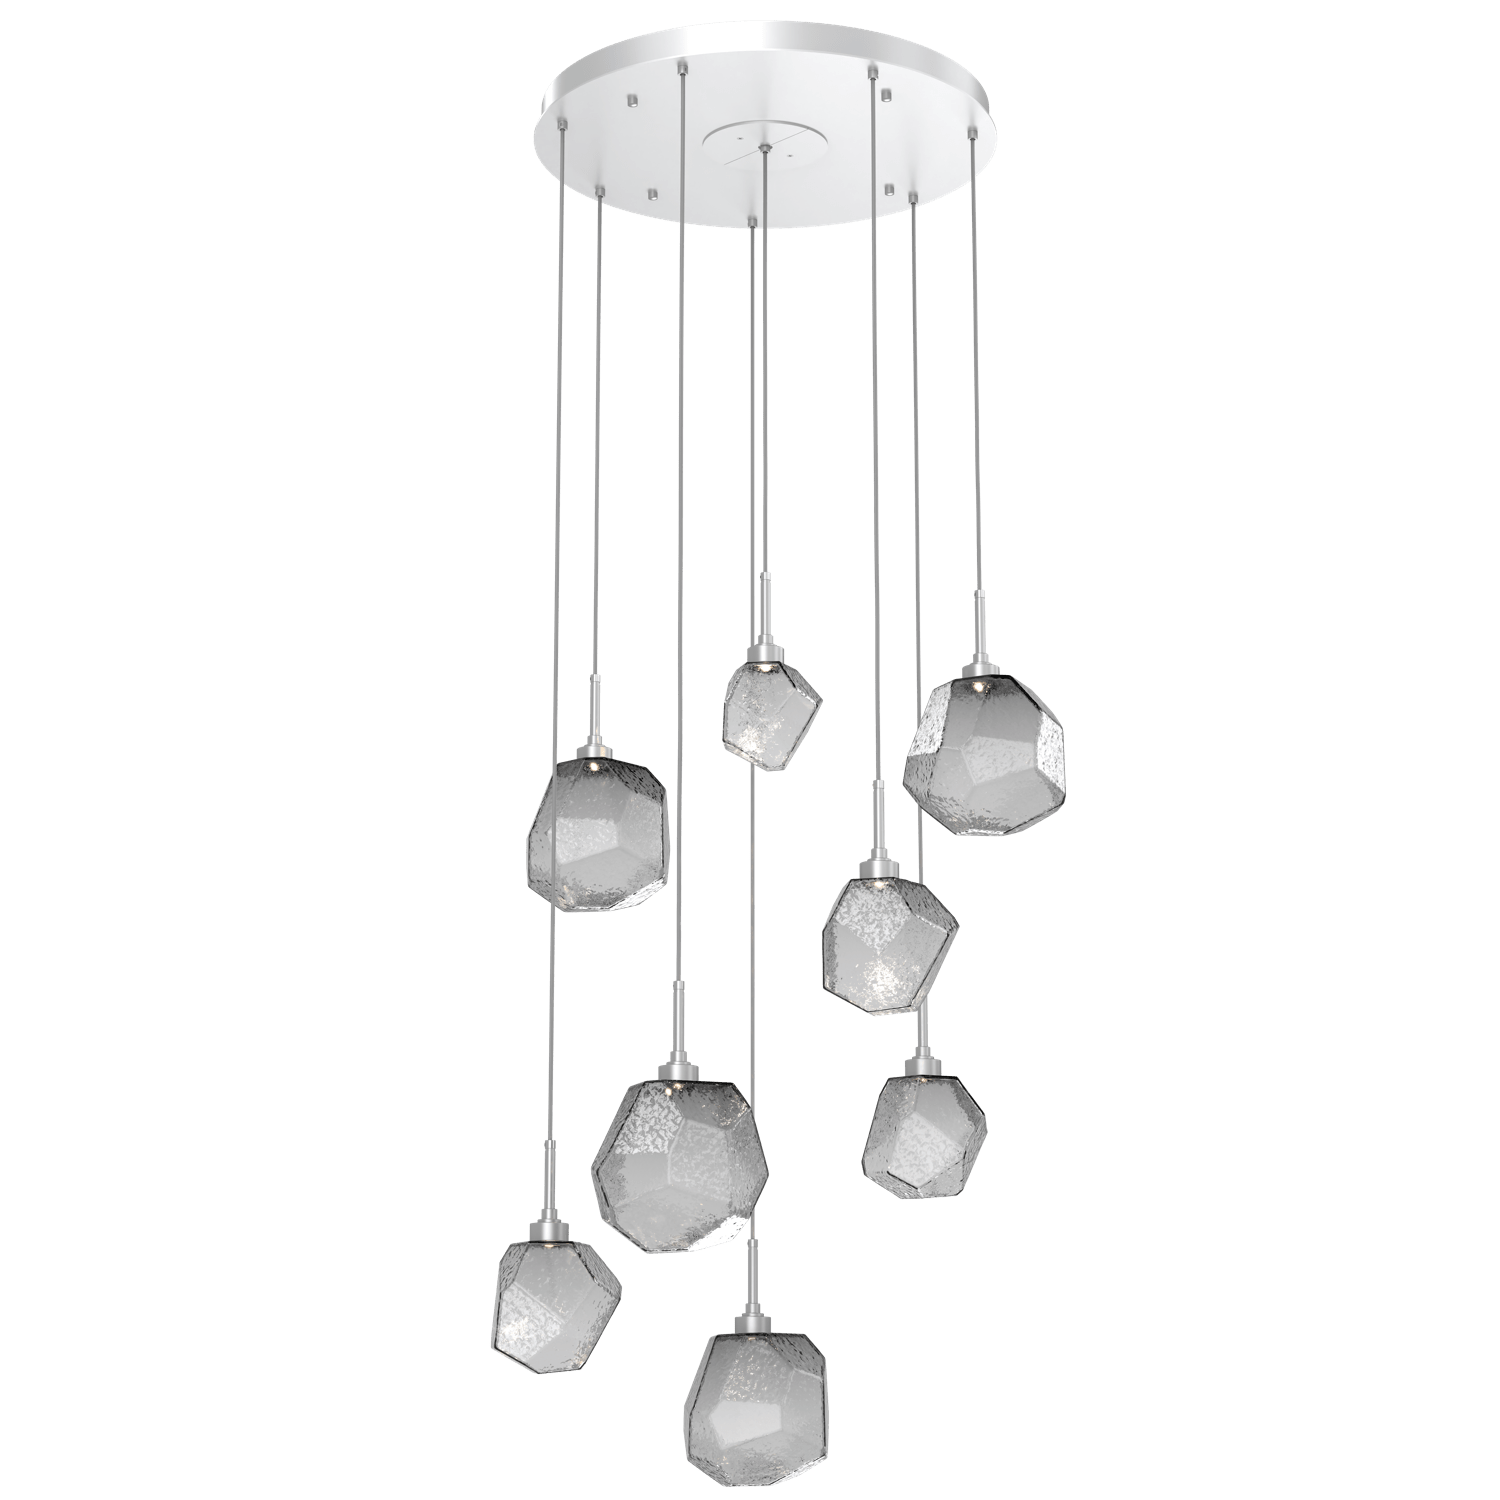 CHB0039-08-CS-S-Hammerton-Studio-Gem-8-light-round-pendant-chandelier-with-classic-silver-finish-and-smoke-blown-glass-shades-and-LED-lamping